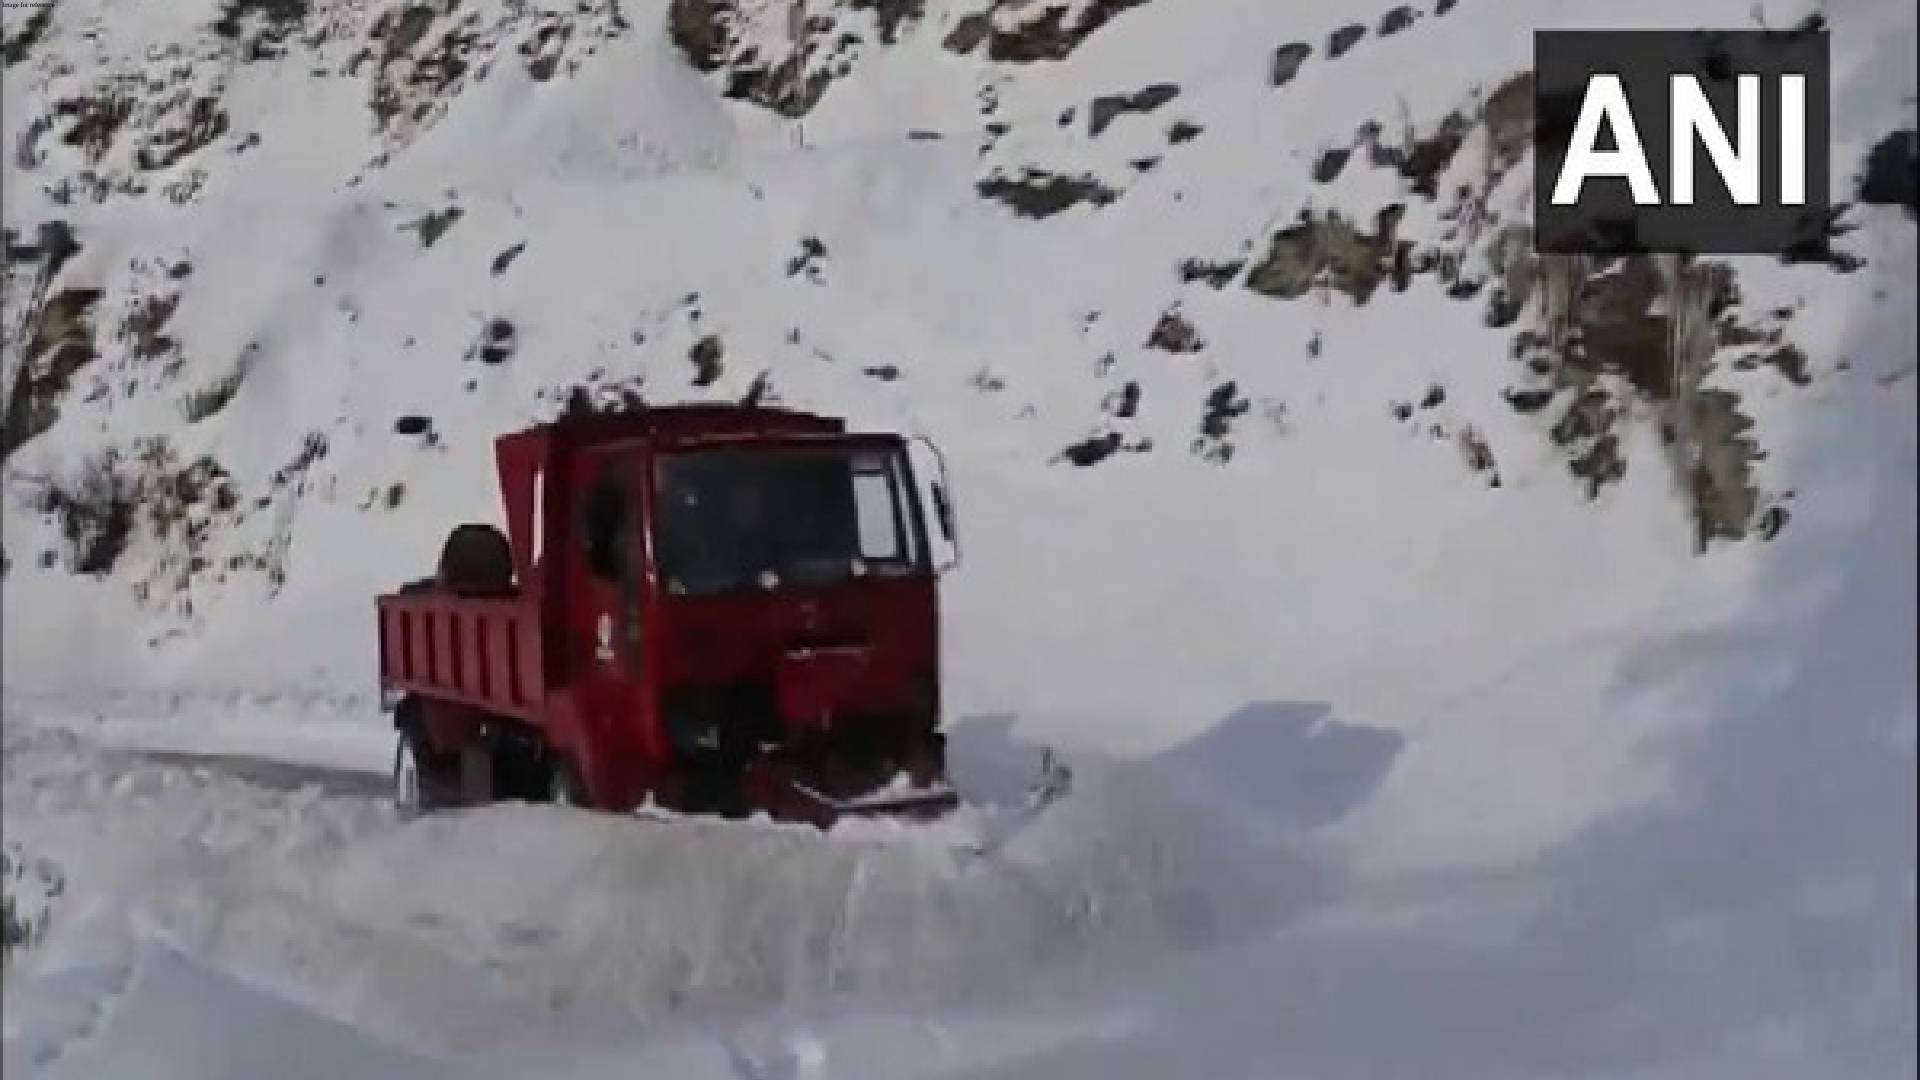 J-K: Snow clearance operation underway in Poonch's avalanche-hit area